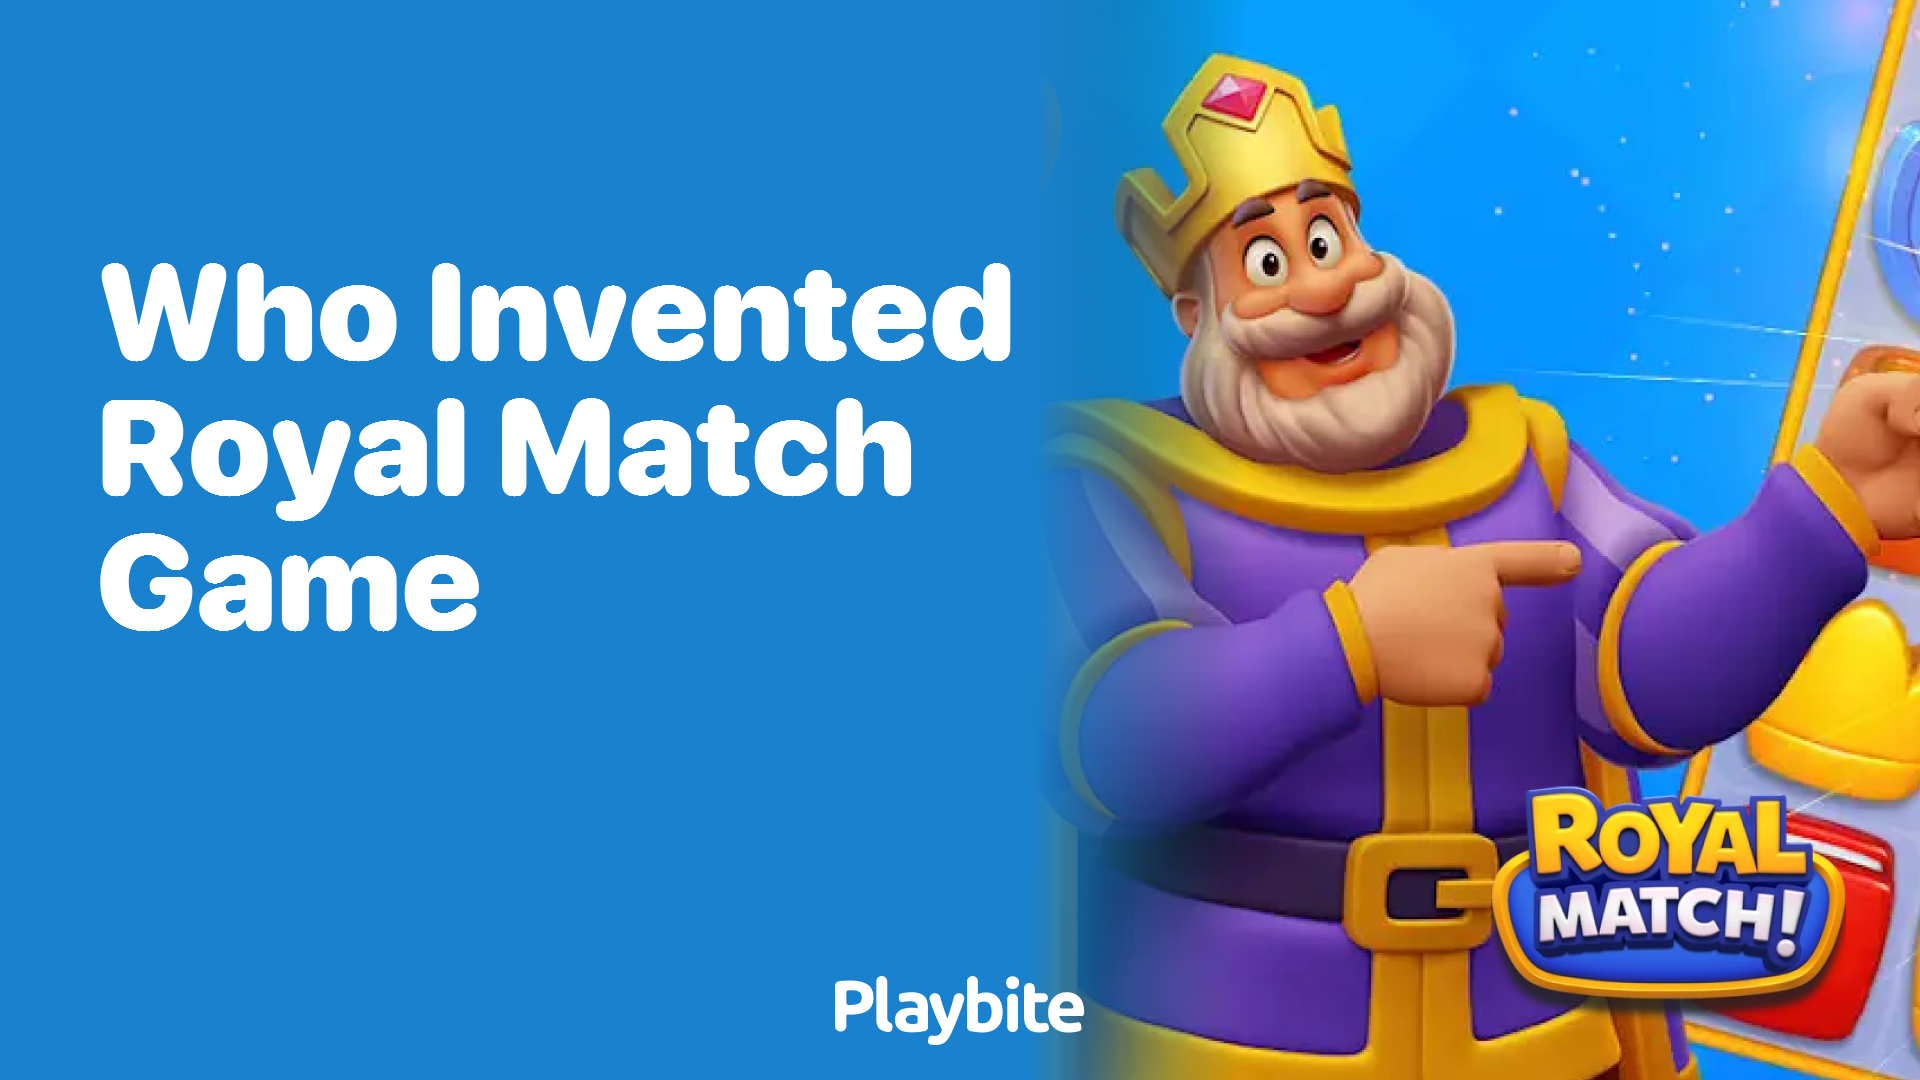 Who Invented the Royal Match Game?